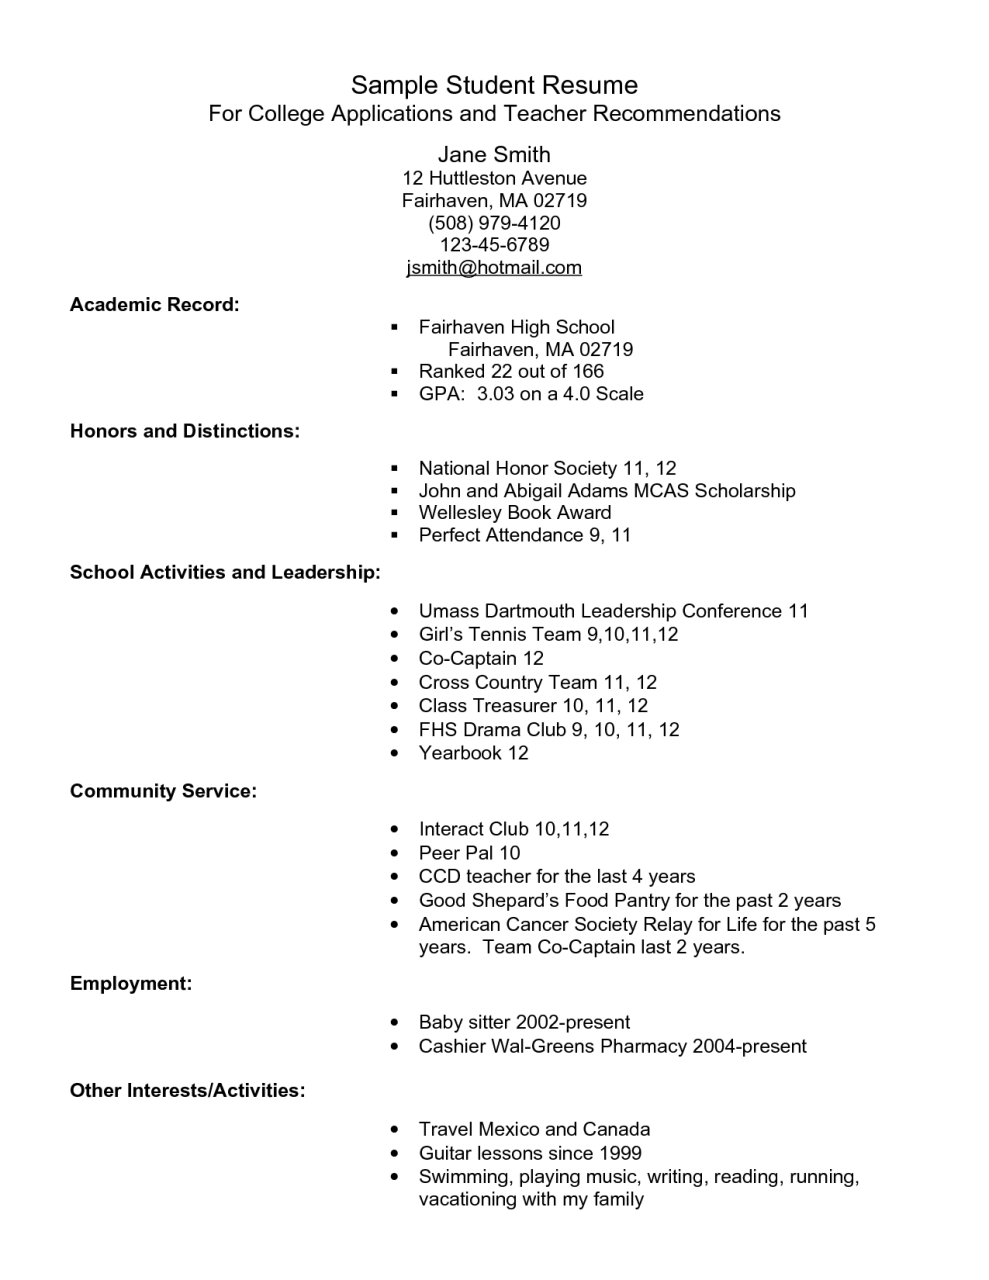 Sample Resume For College Scholarship Application